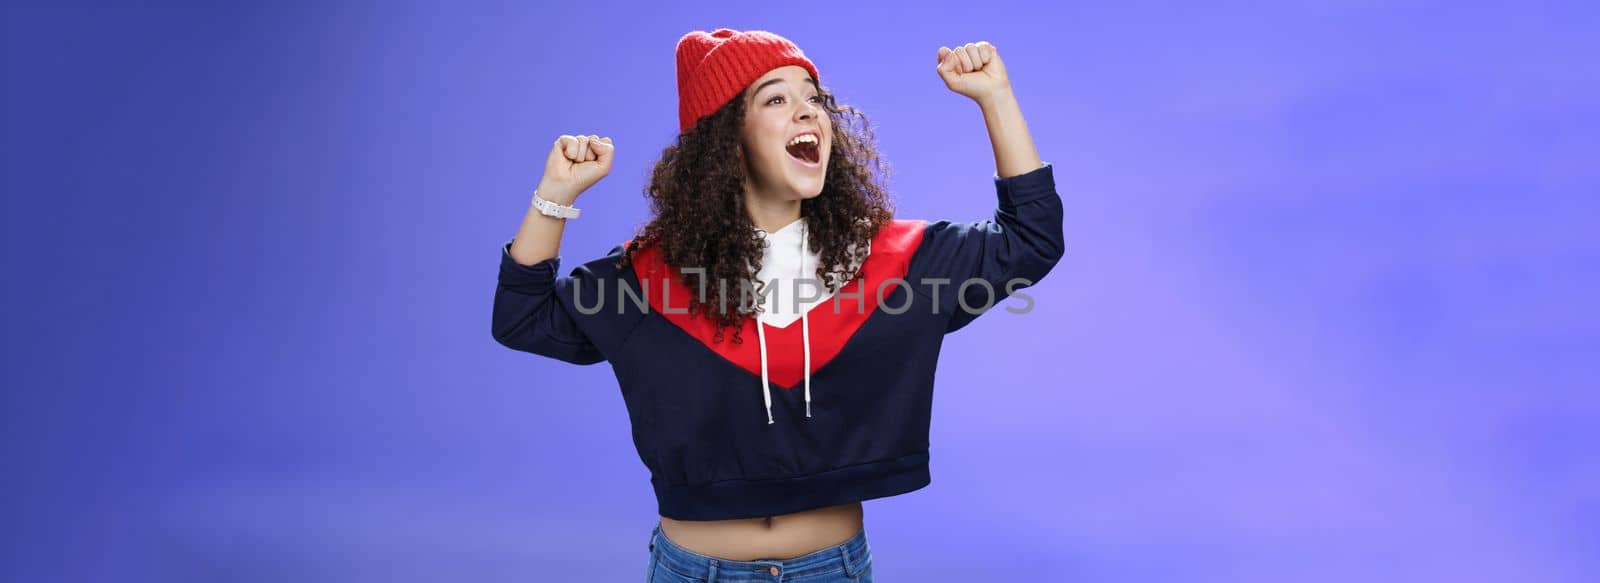 Happy playful and carefree woman yelling out loud tell world great news looking left amused and delighted as shouting positive words raising hands in triumph, cheering for team, wearing hat by Benzoix